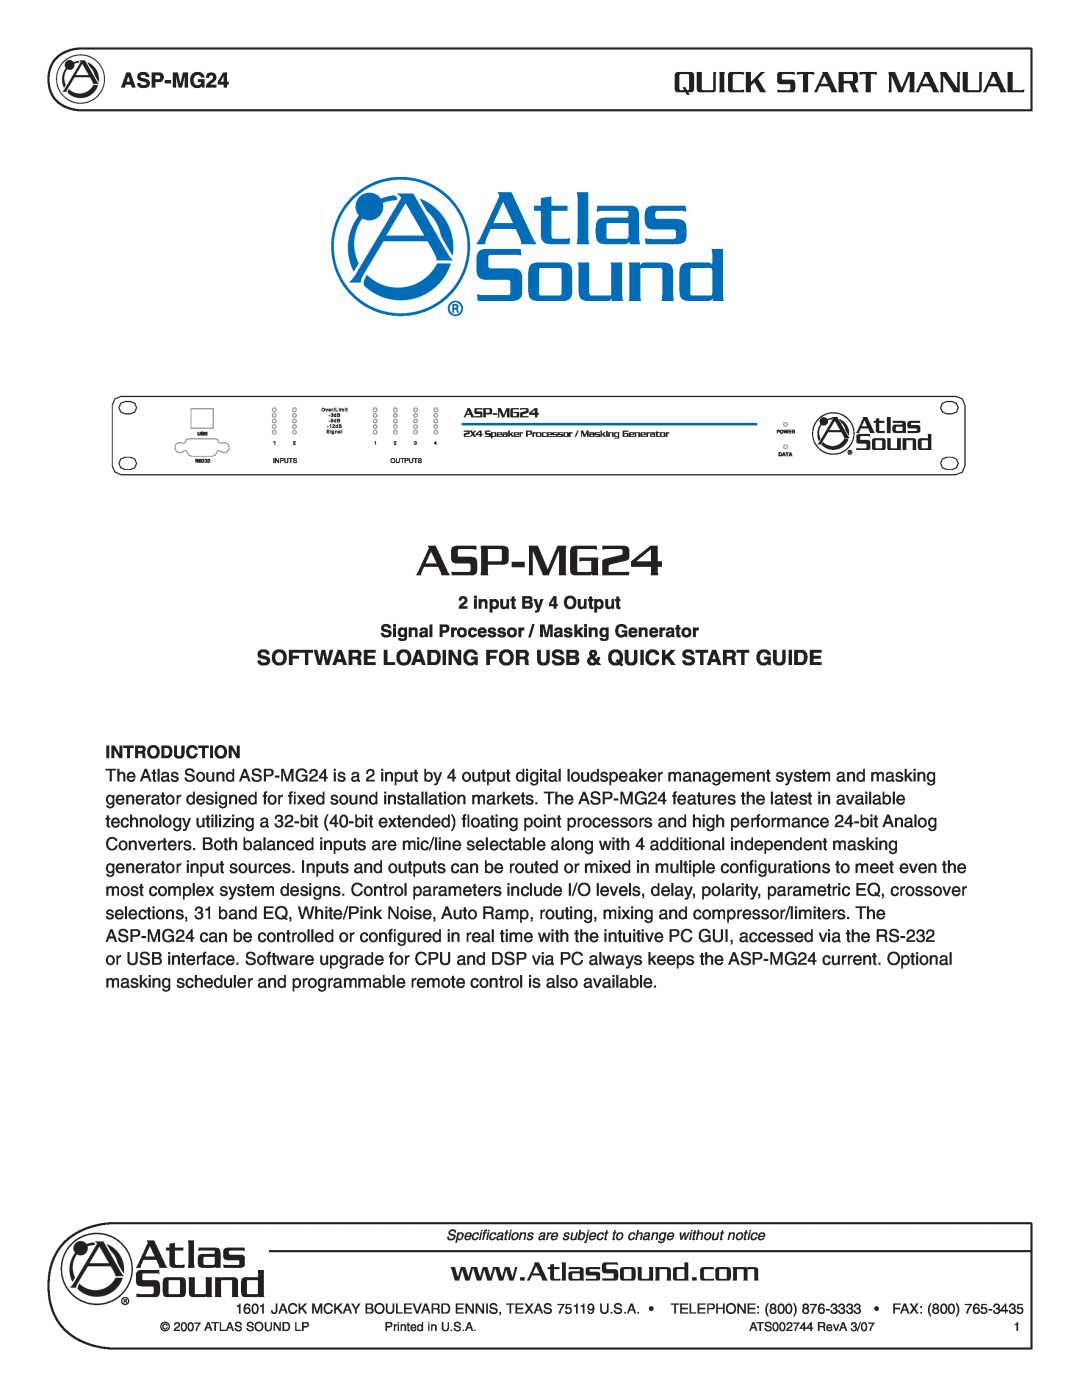 Atlas Sound ASP-MG24 quick start Quick Start Manual, Software Loading For Usb & Quick Start Guide, input By 4 Output 